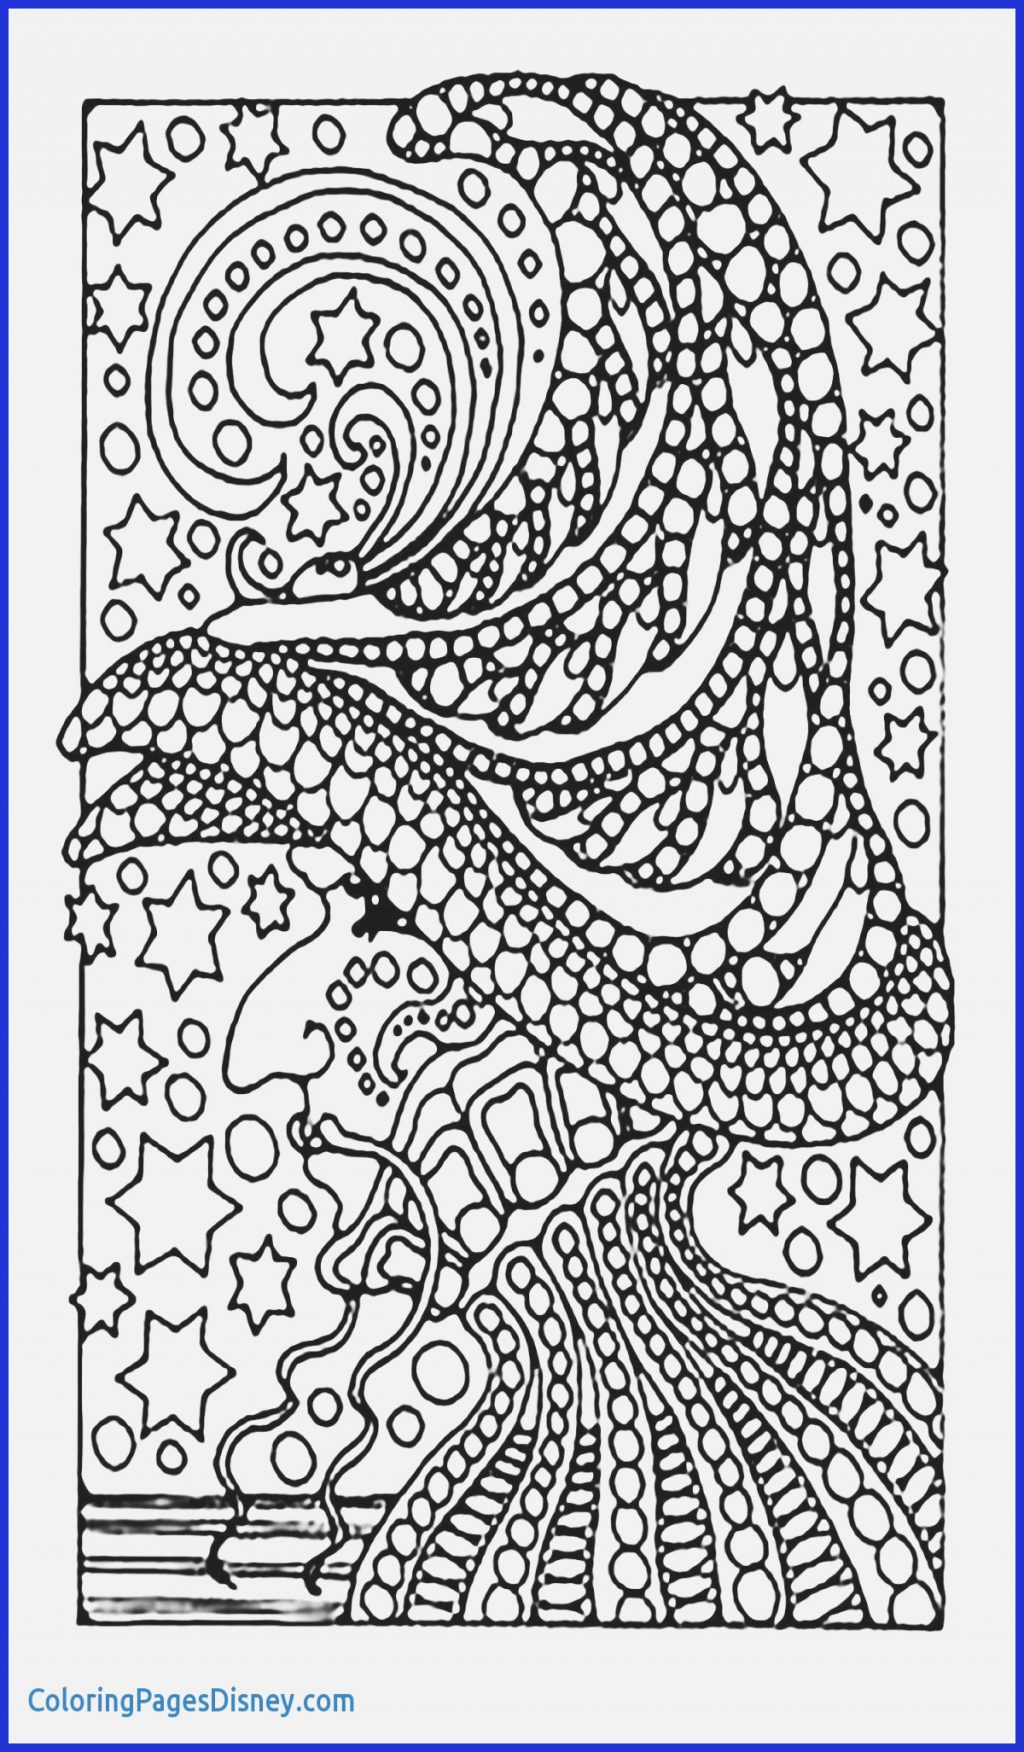 Markers Coloring Pages Coloring Page Best Adult Coloring Book Markers For Books Luxury